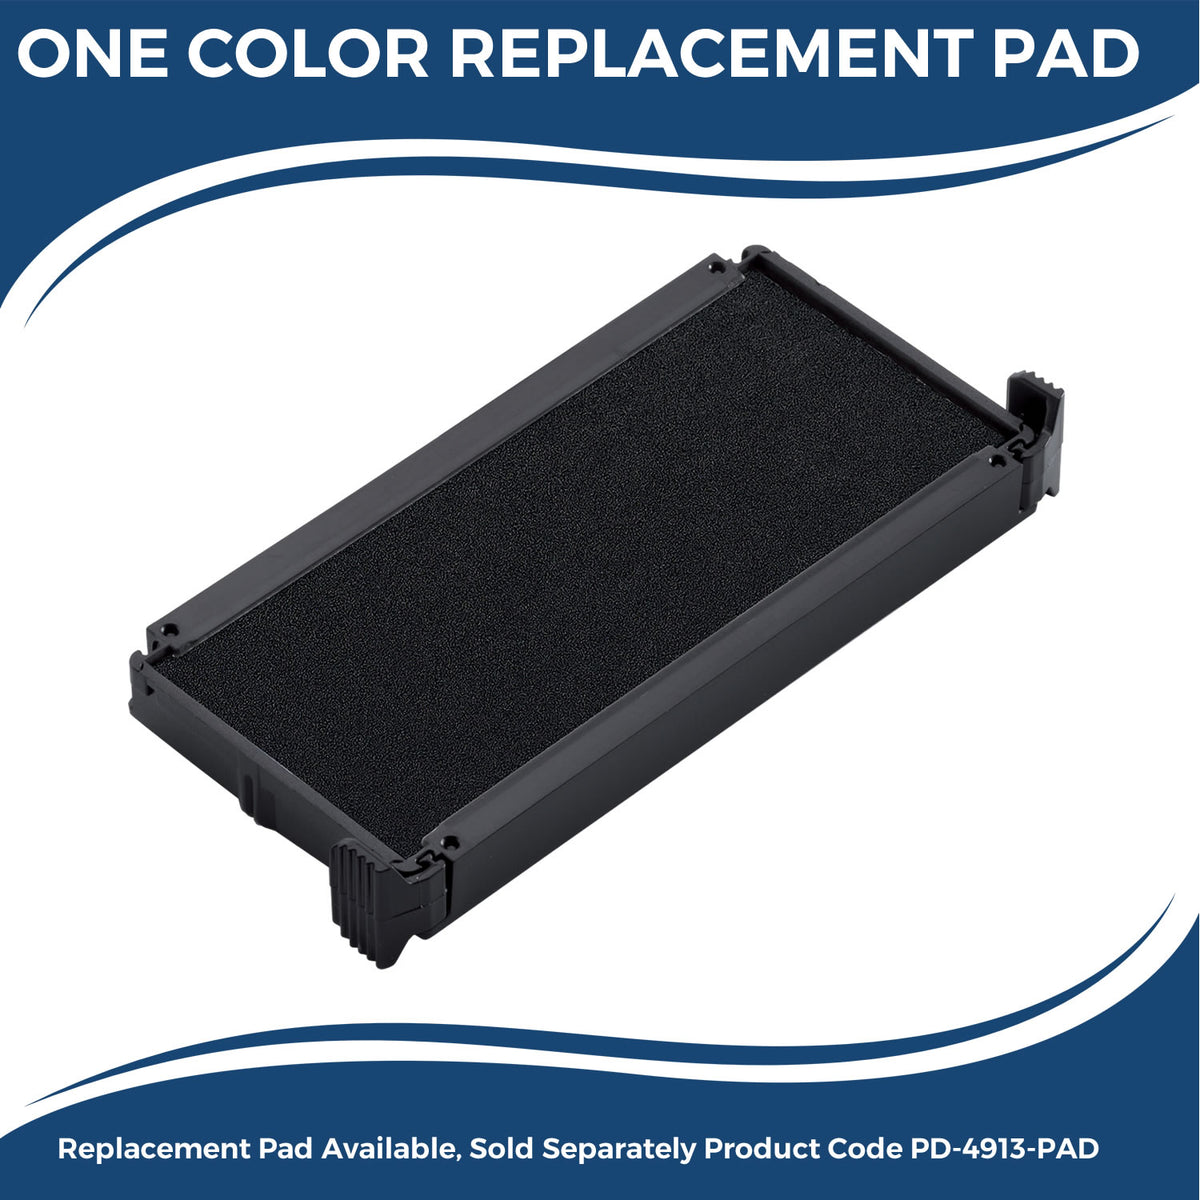 Large Self-Inking Check Your Work Stamp 5626S Large Replacment Pad